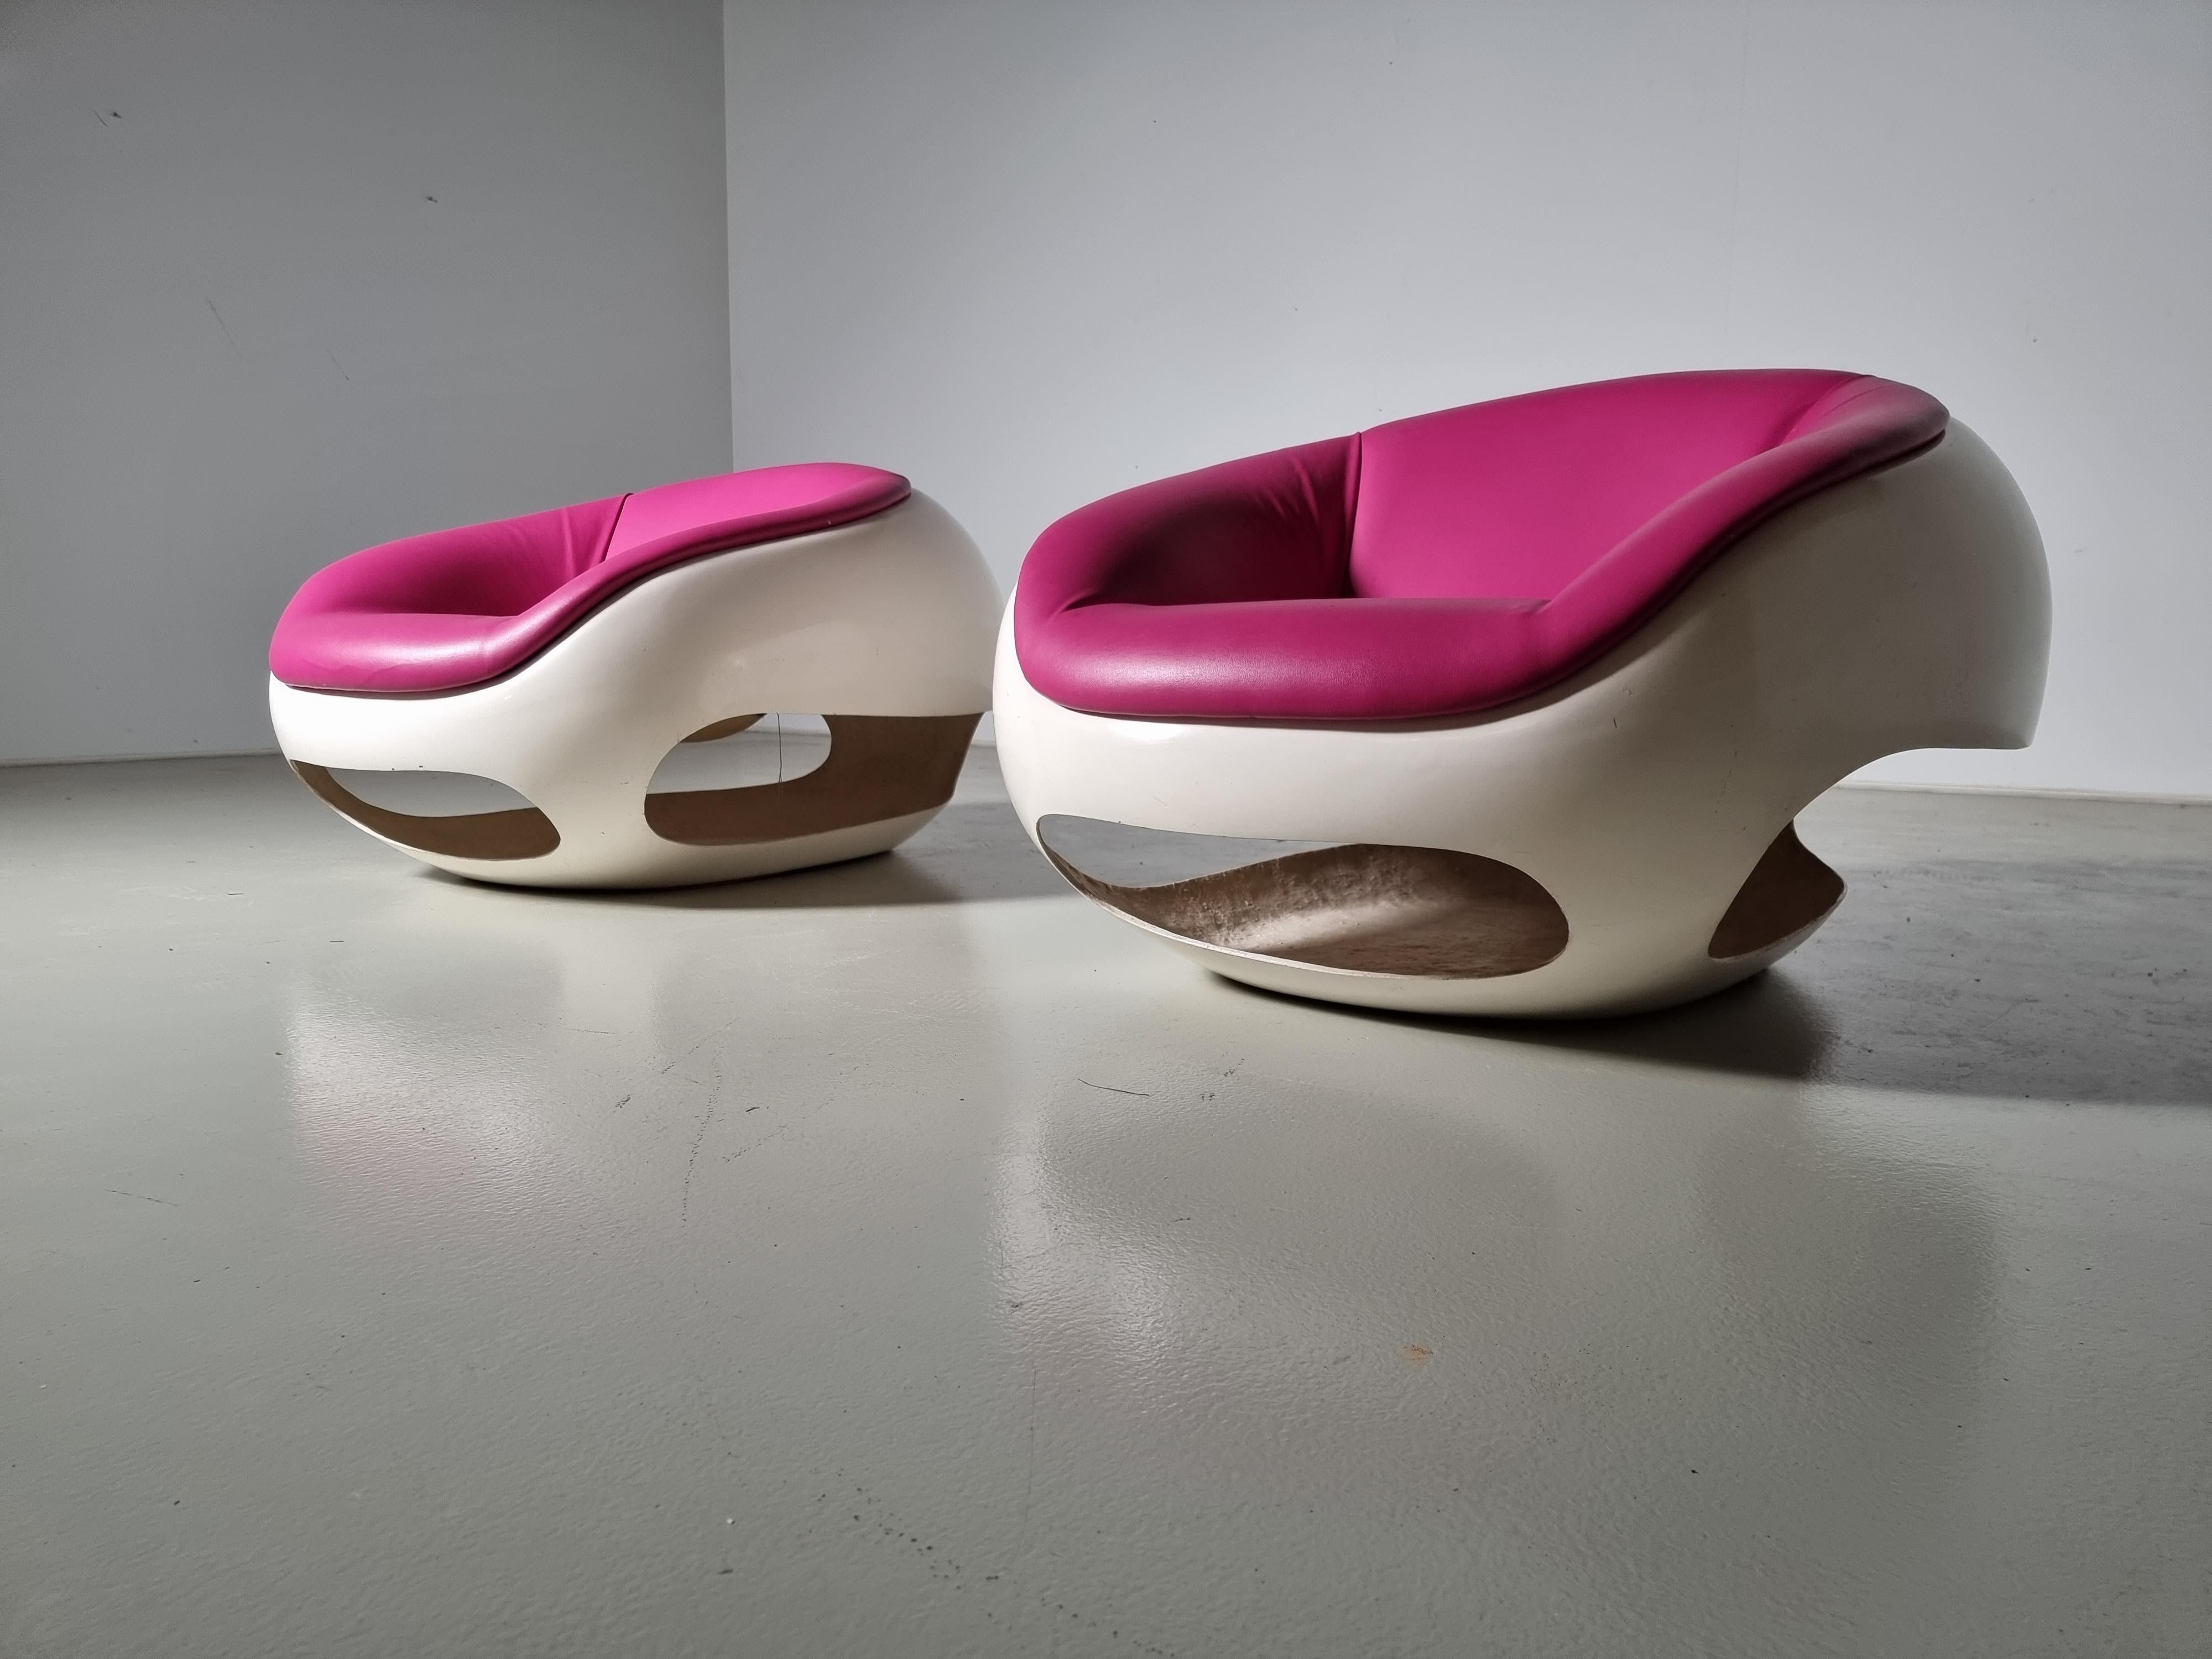 Postmodern pair of lounge chairs by Italian designer Mario Sabot. The design is inspired by the GT series of Ferrari in the 1960s. The cutouts are shaped after the grill and wheel arch of the iconic sports car. Cream white fiberglass base and the